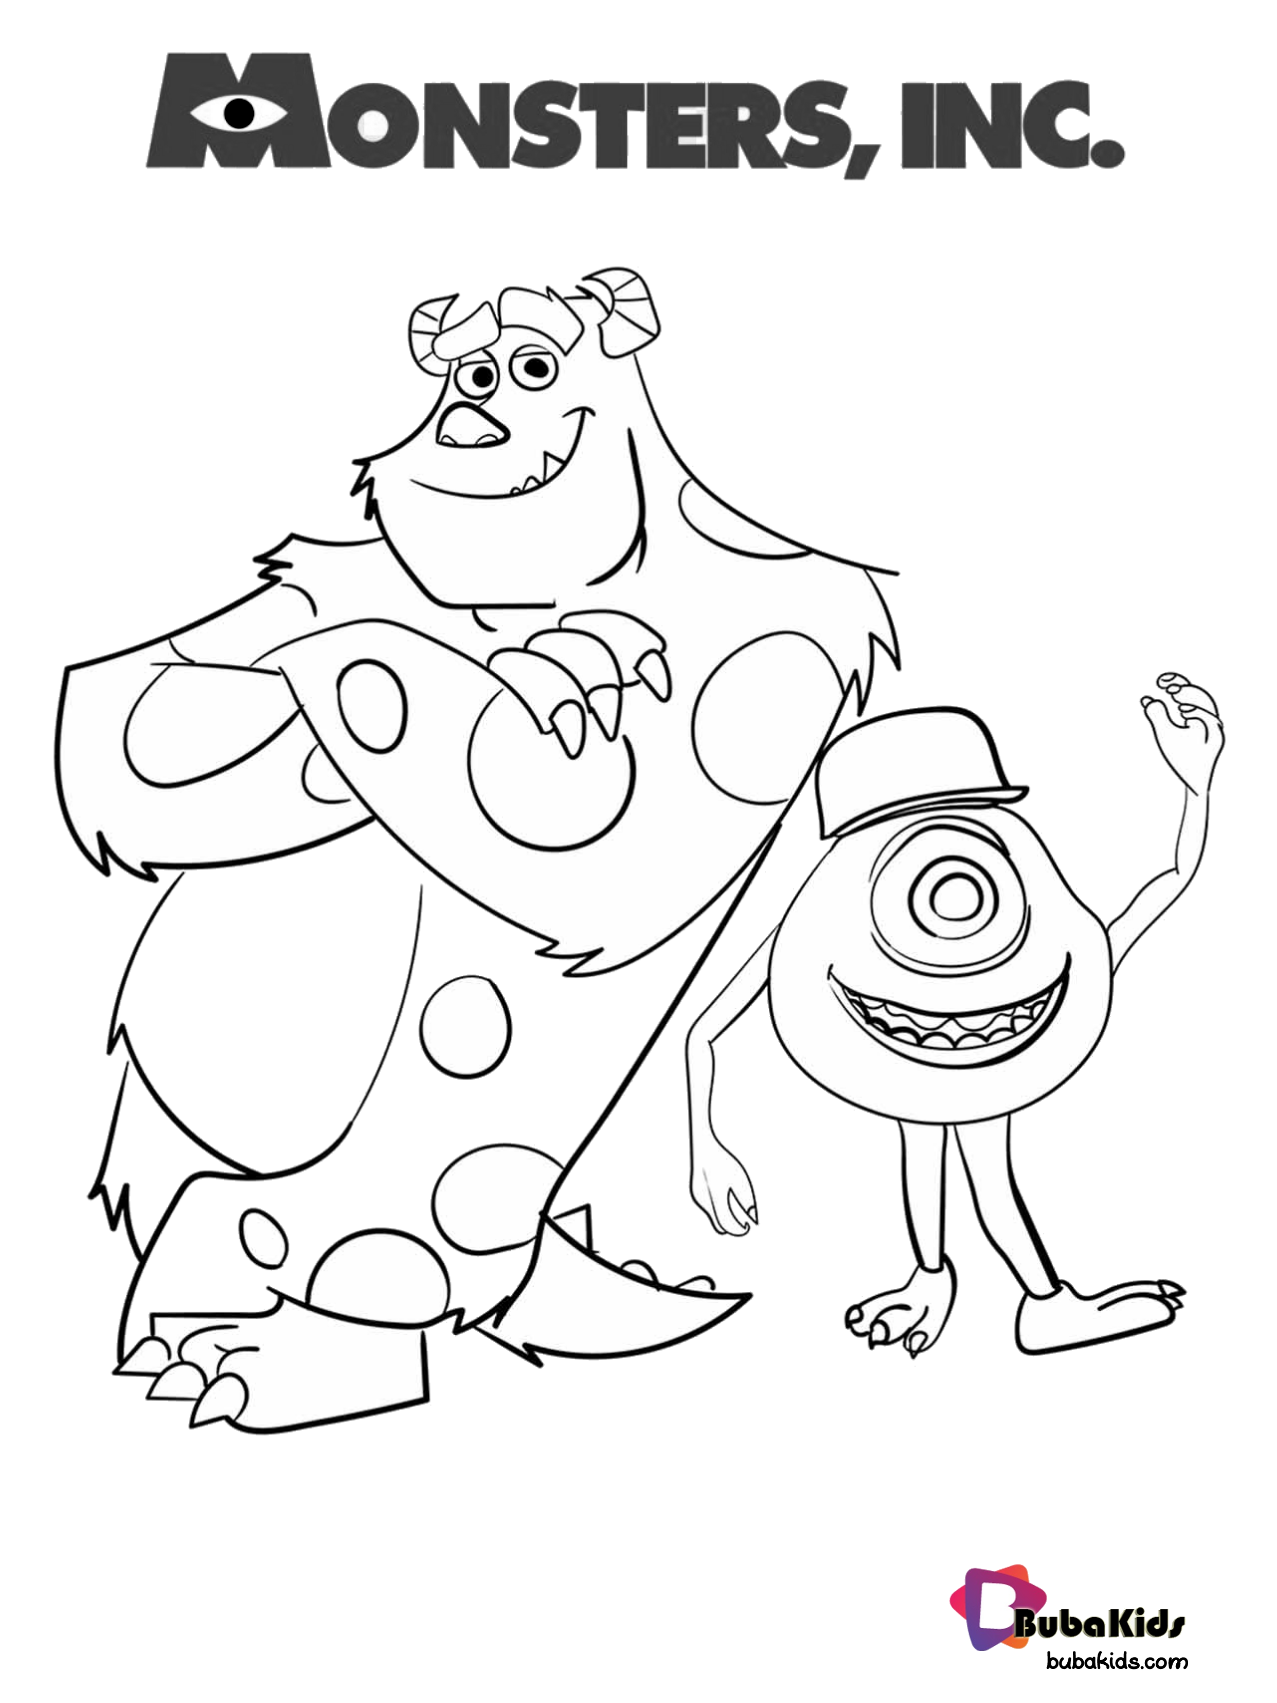 Sulley and Mike Monster Inc coloring page. Wallpaper